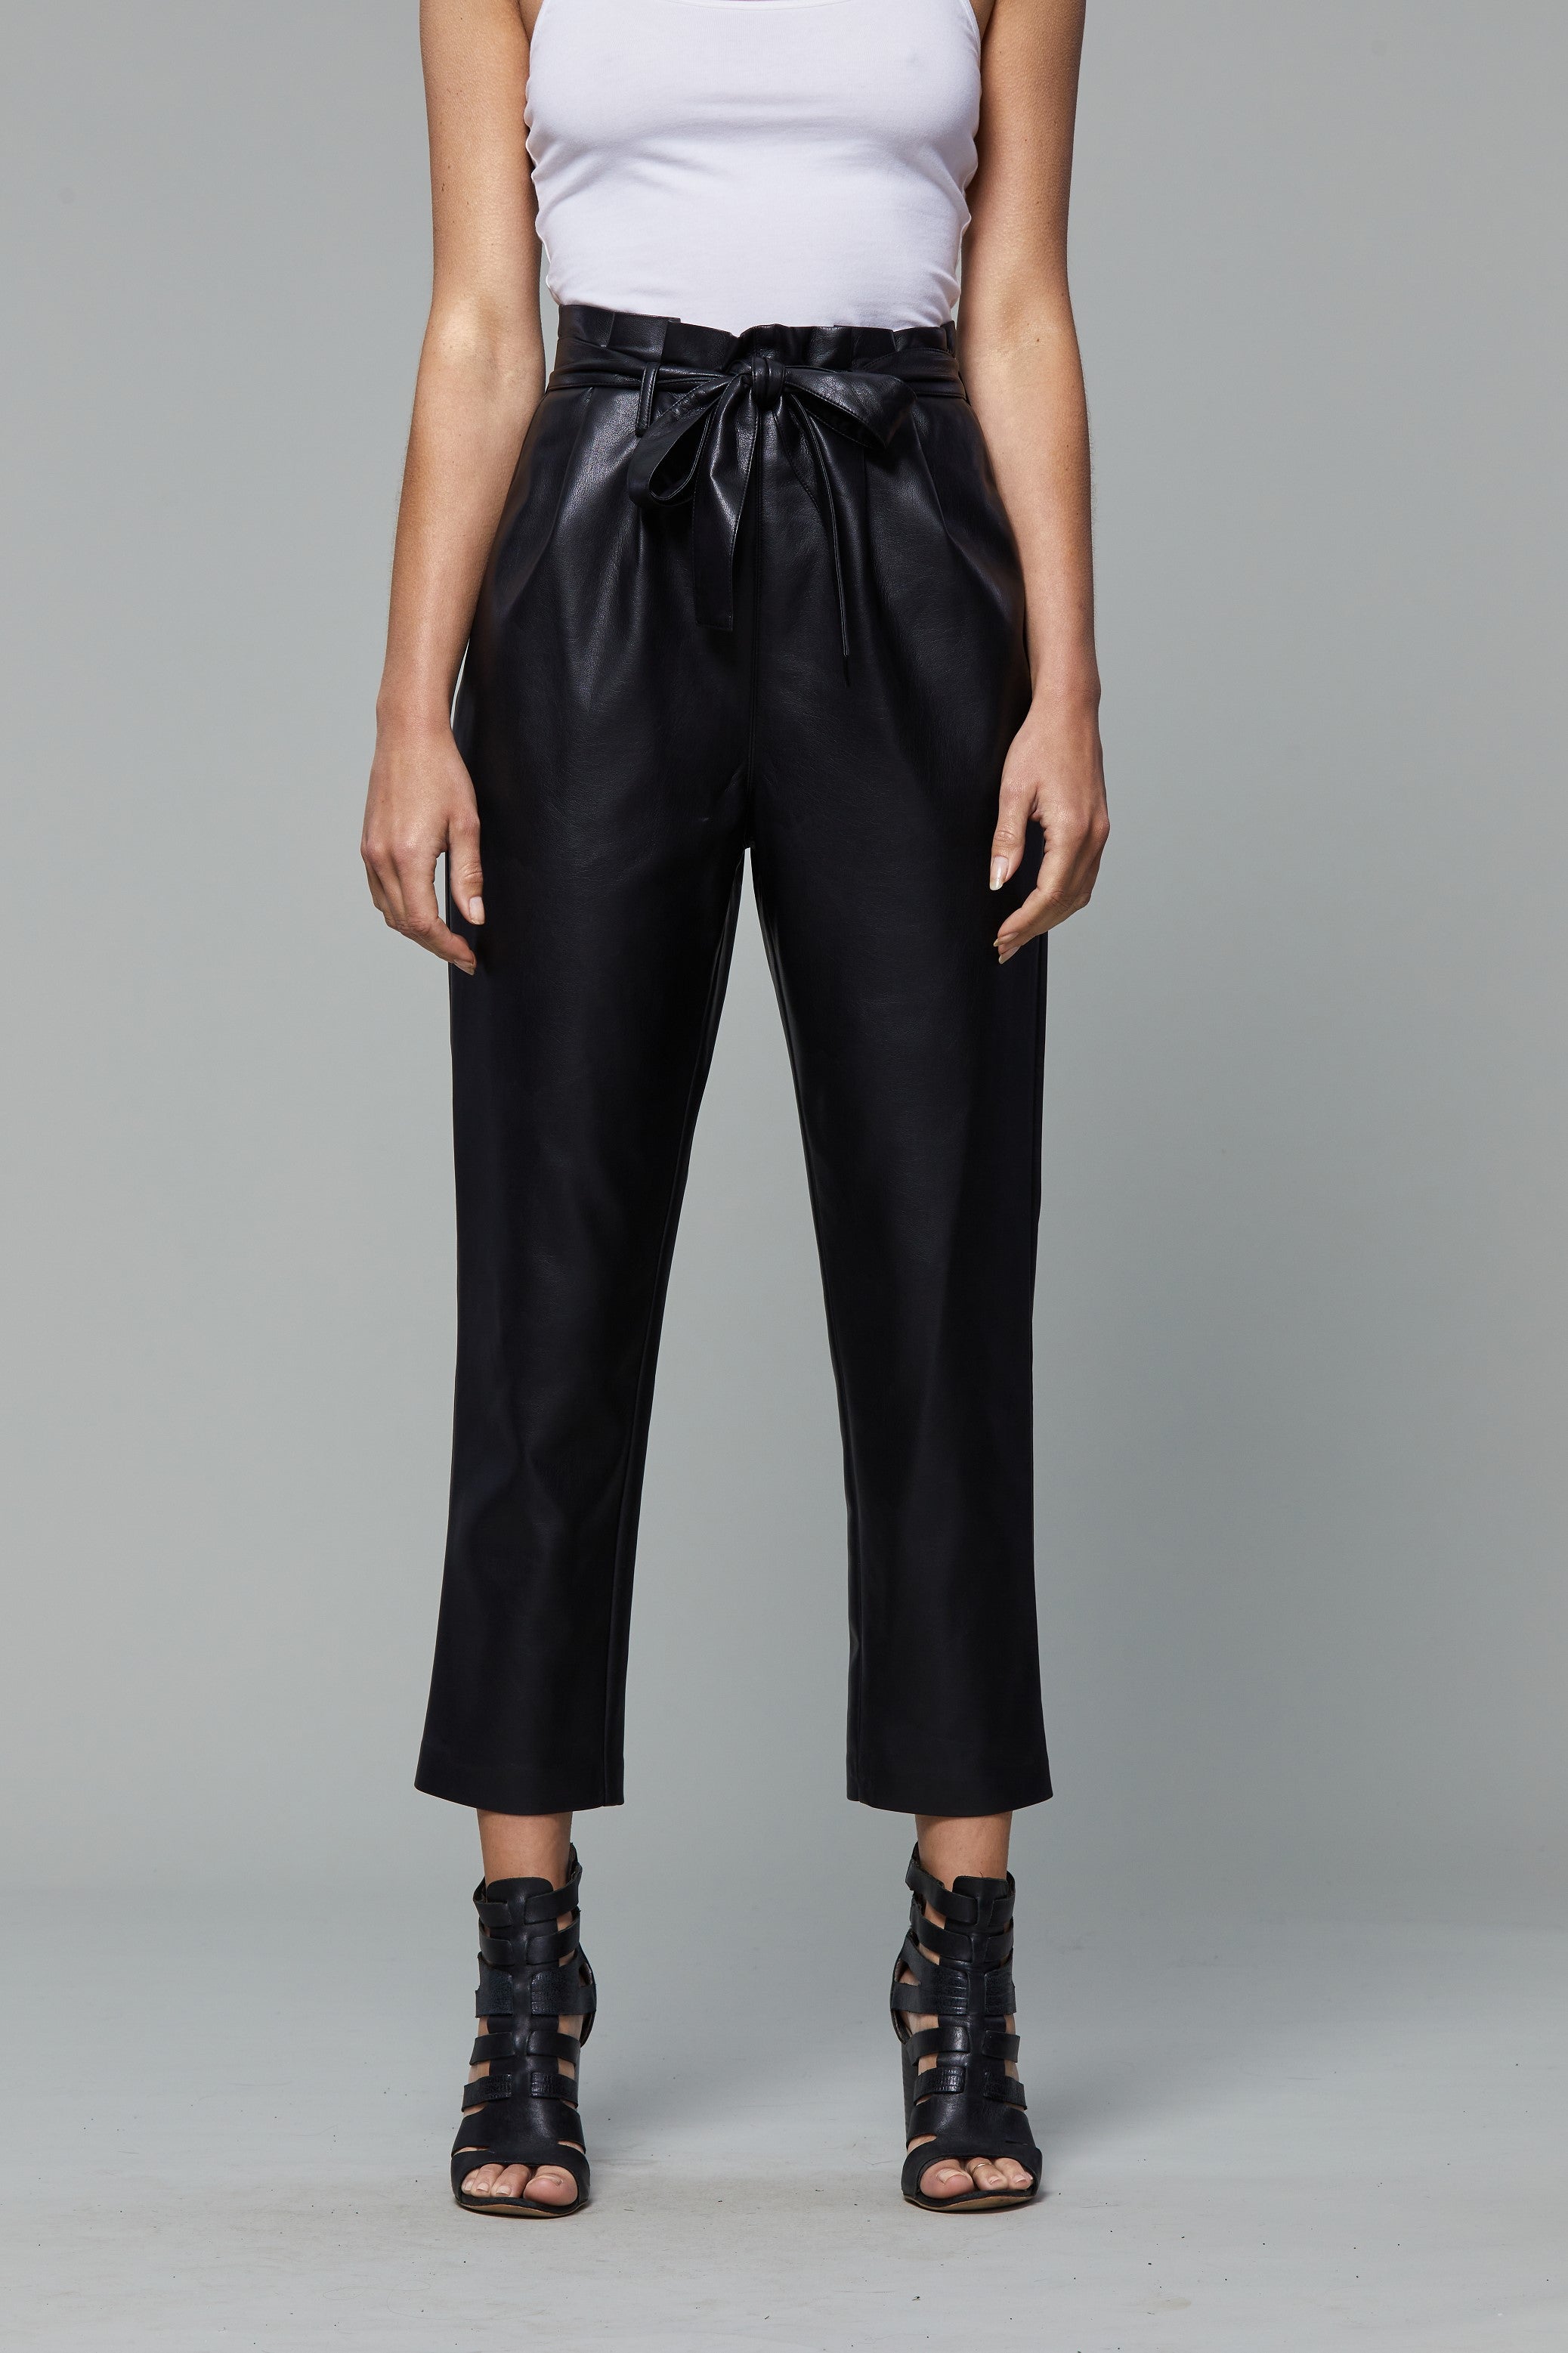 Butter Soft Paper Bag Vegan Leather Pants – Barlow and Browning